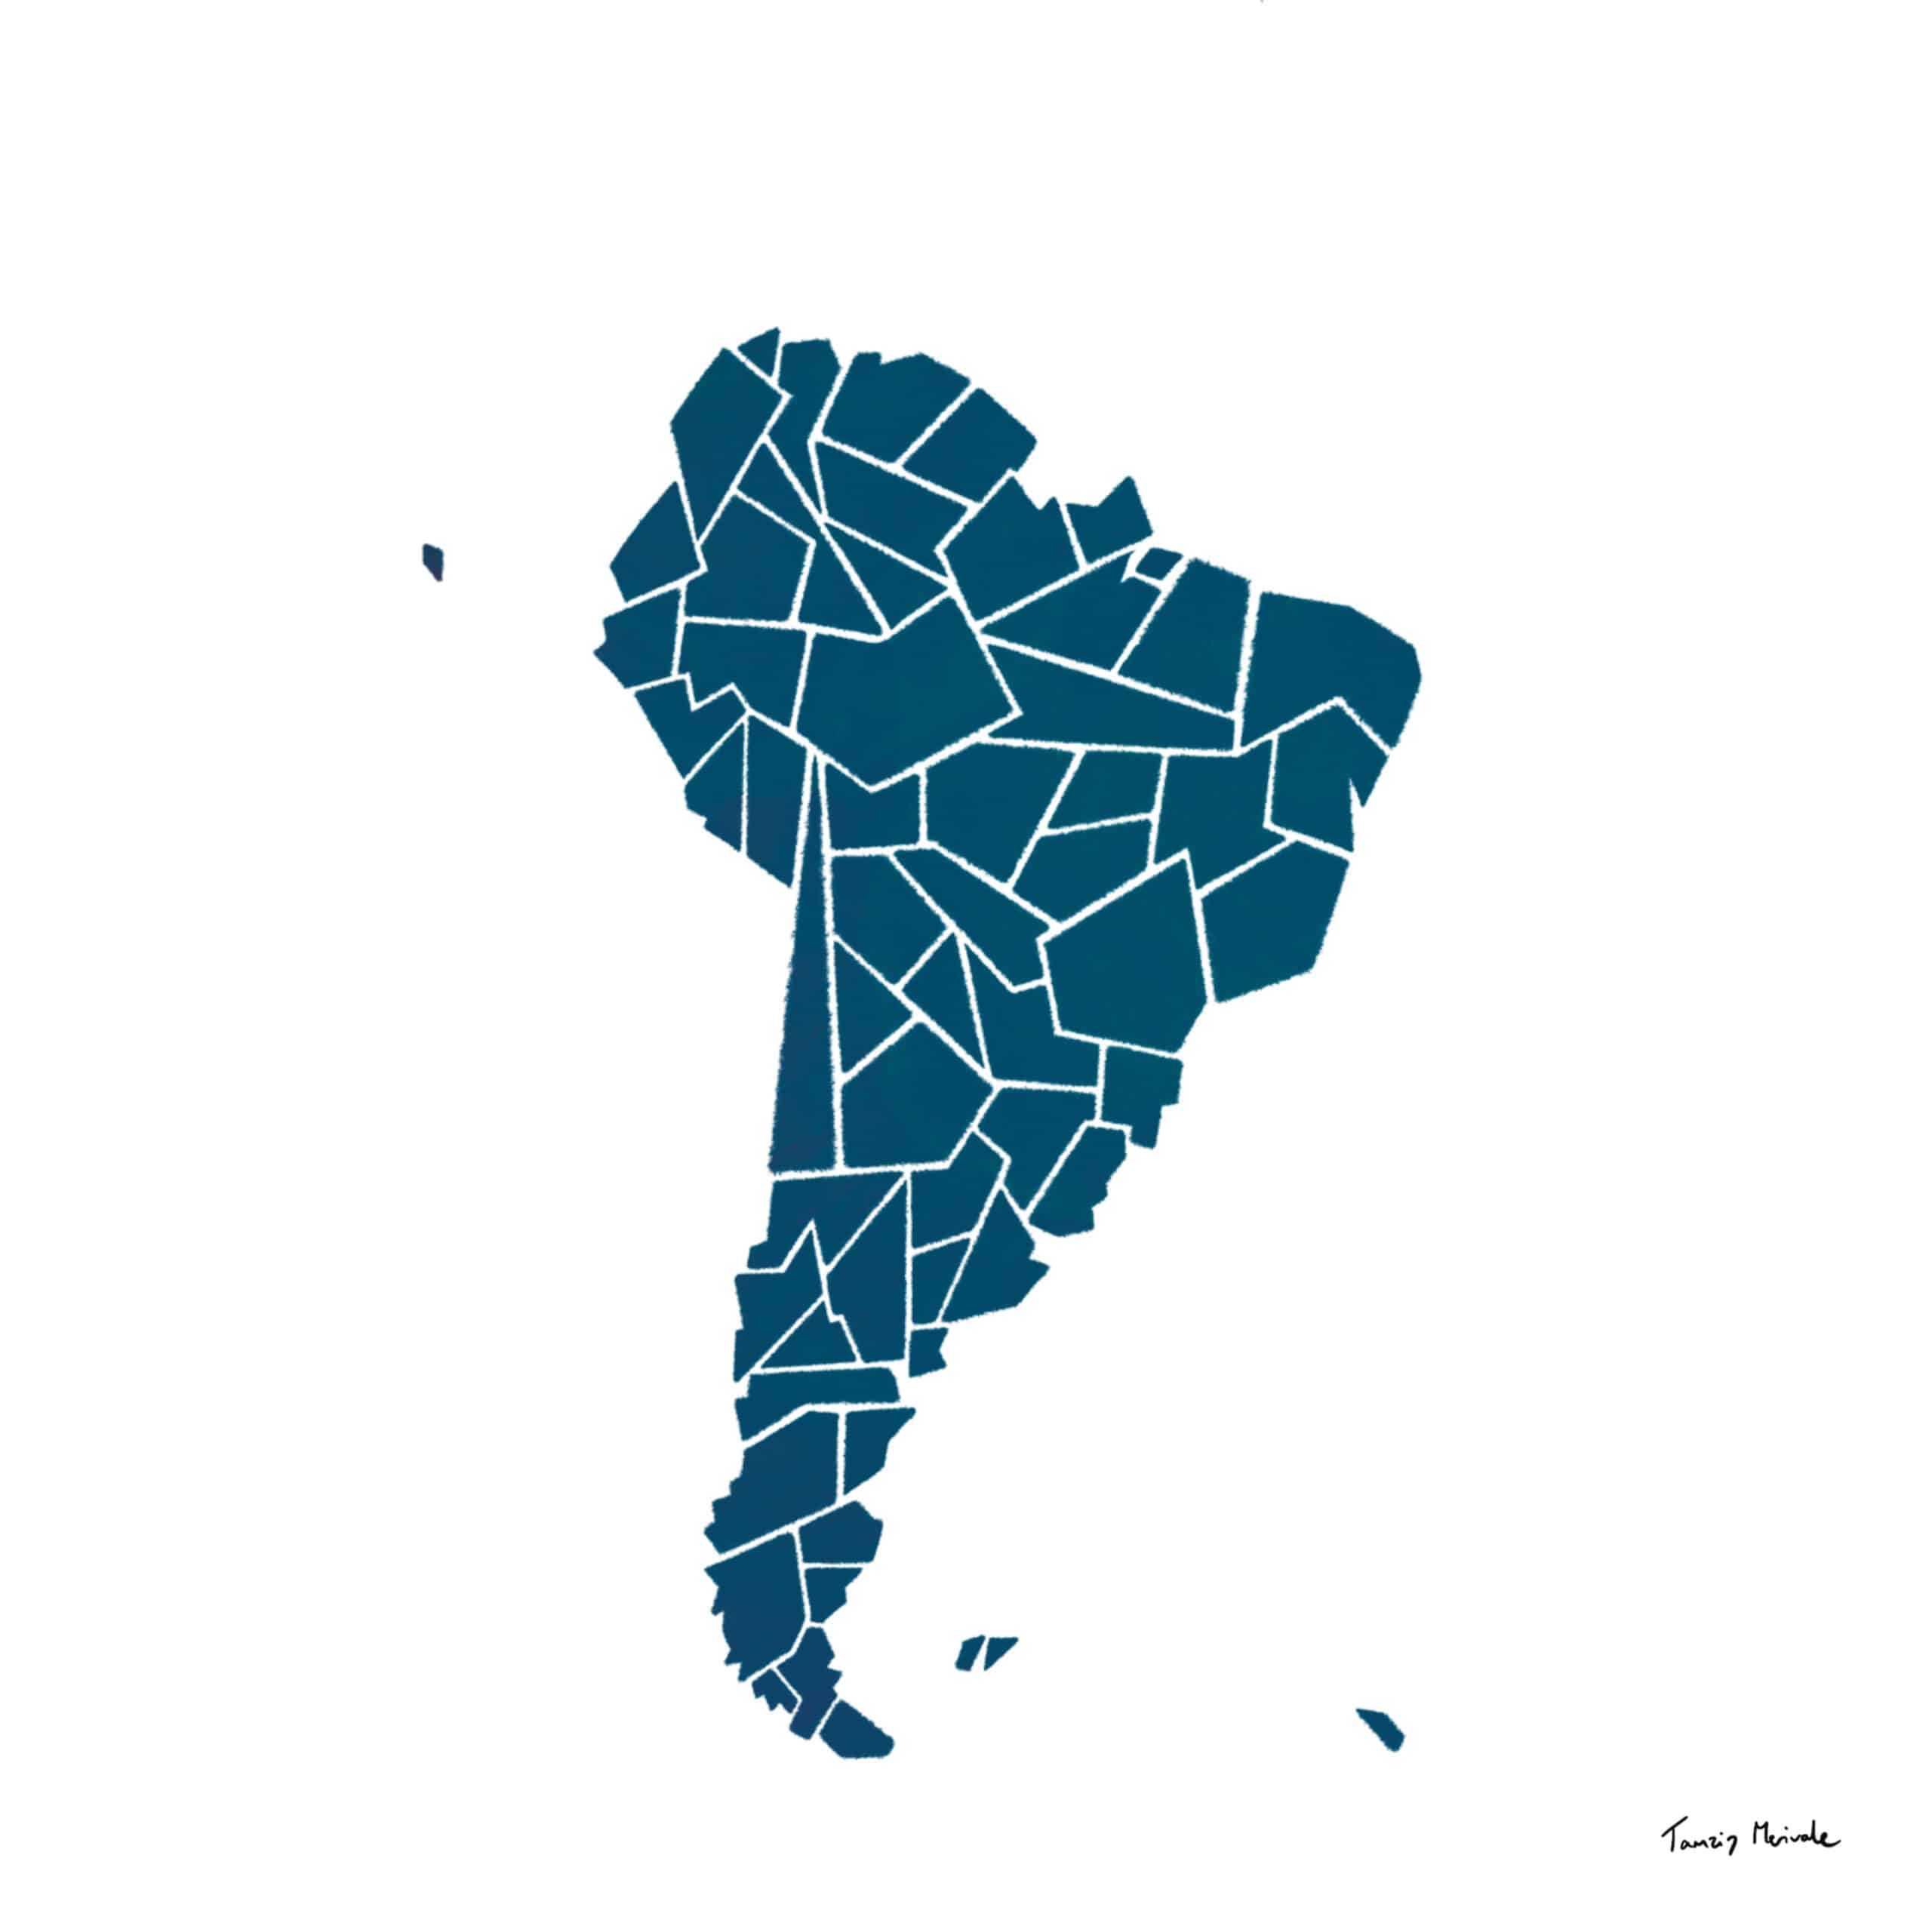 Illustrated maps - geometric map of South America in dark blue